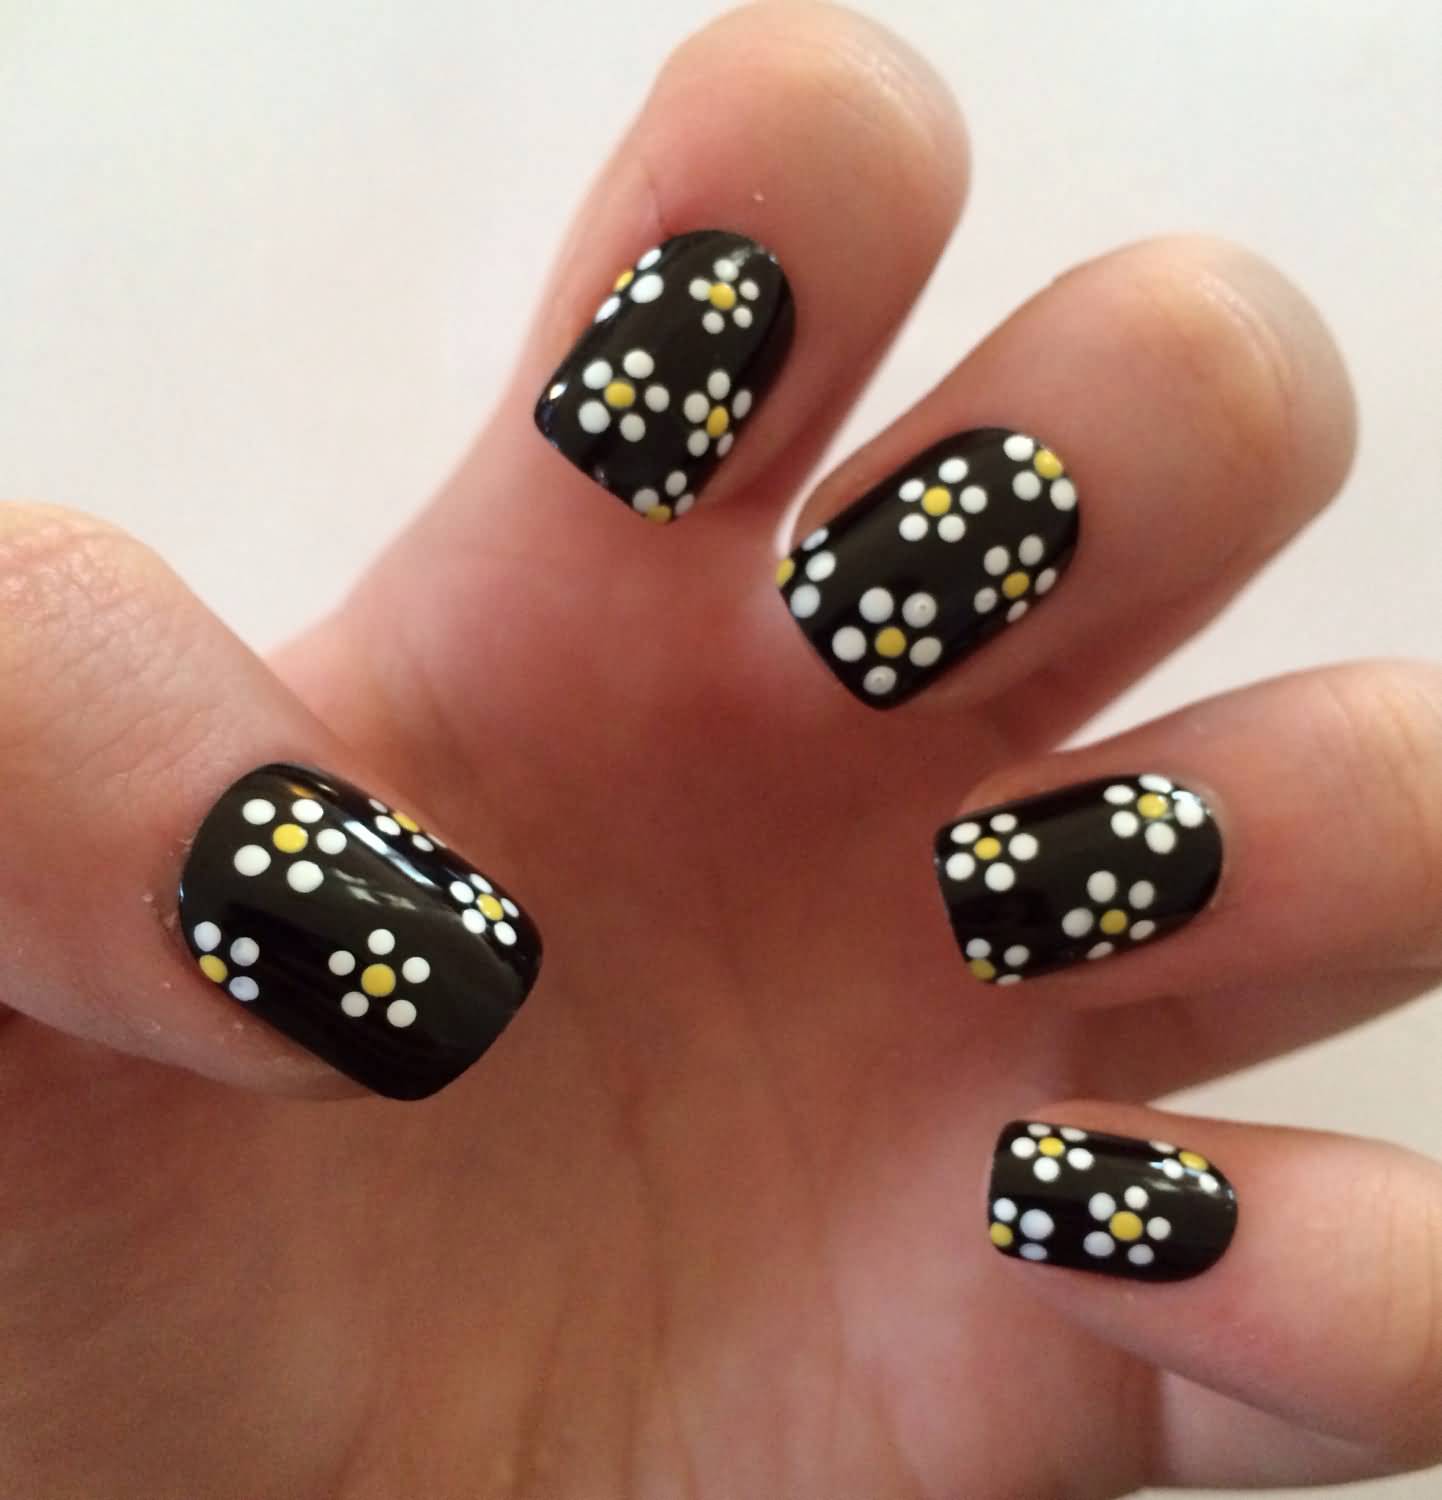 Black Glossy Nails With White Flower Nail Art